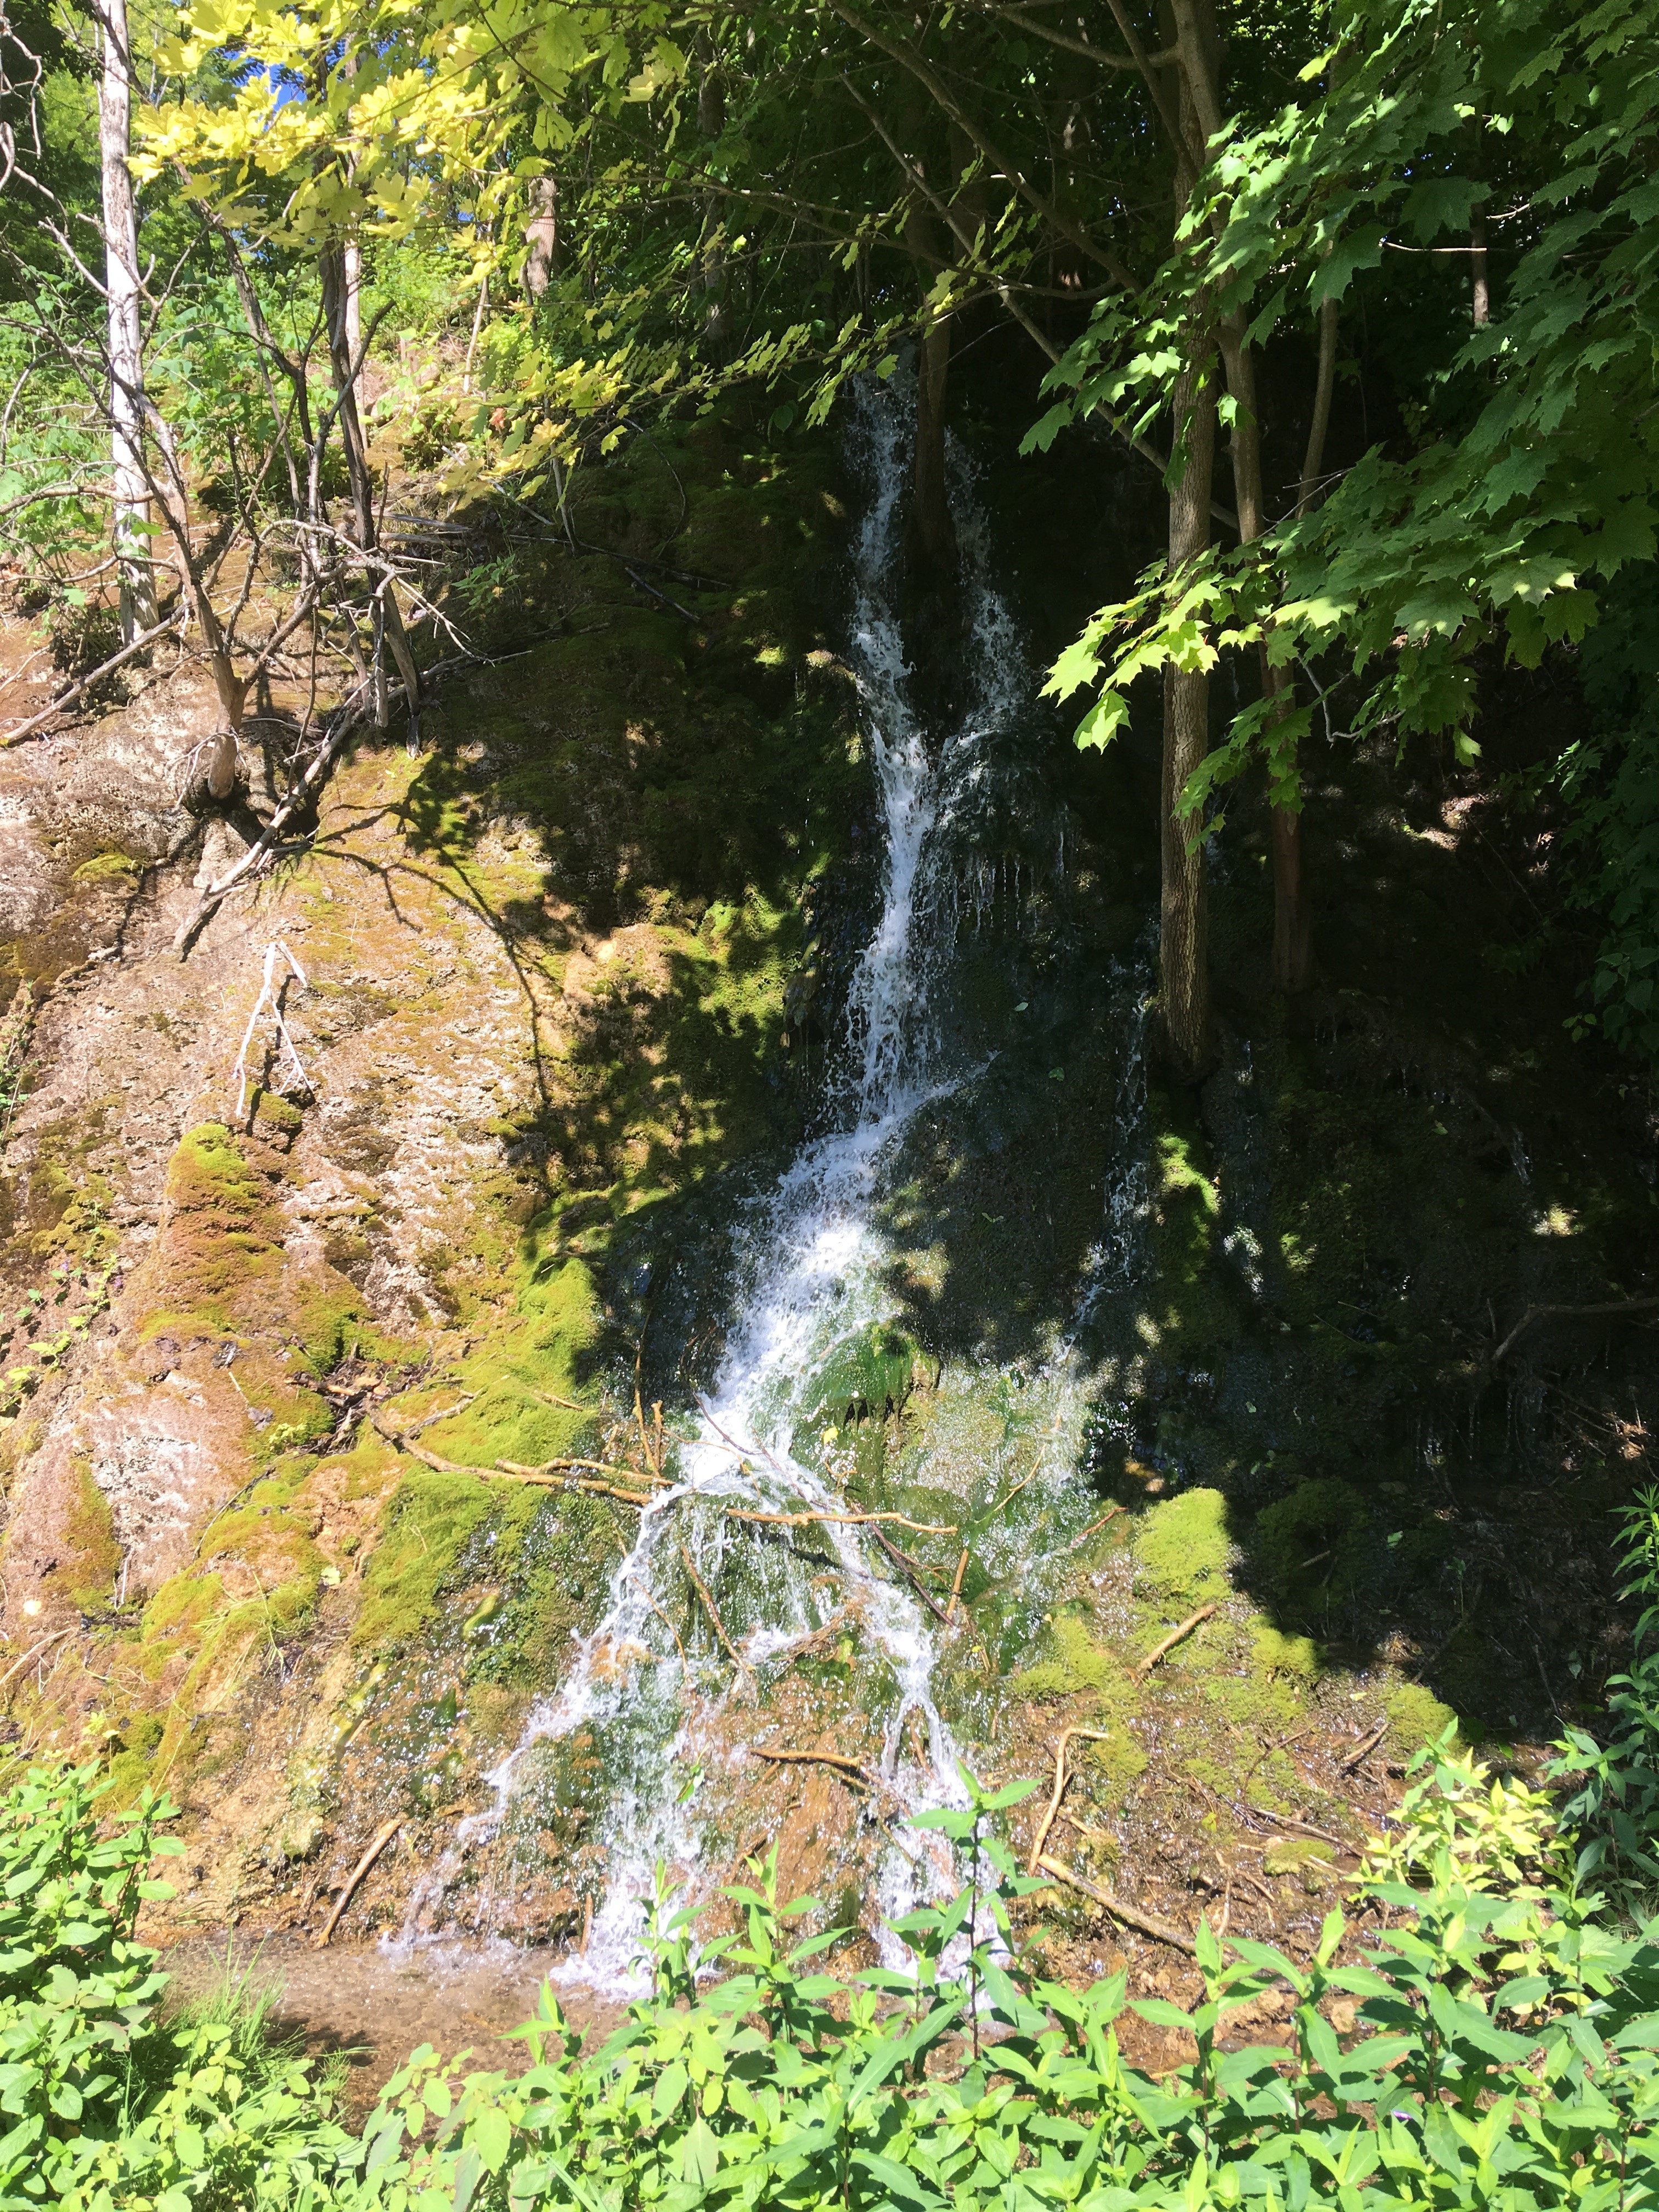 There are many small waterfalls along the road.